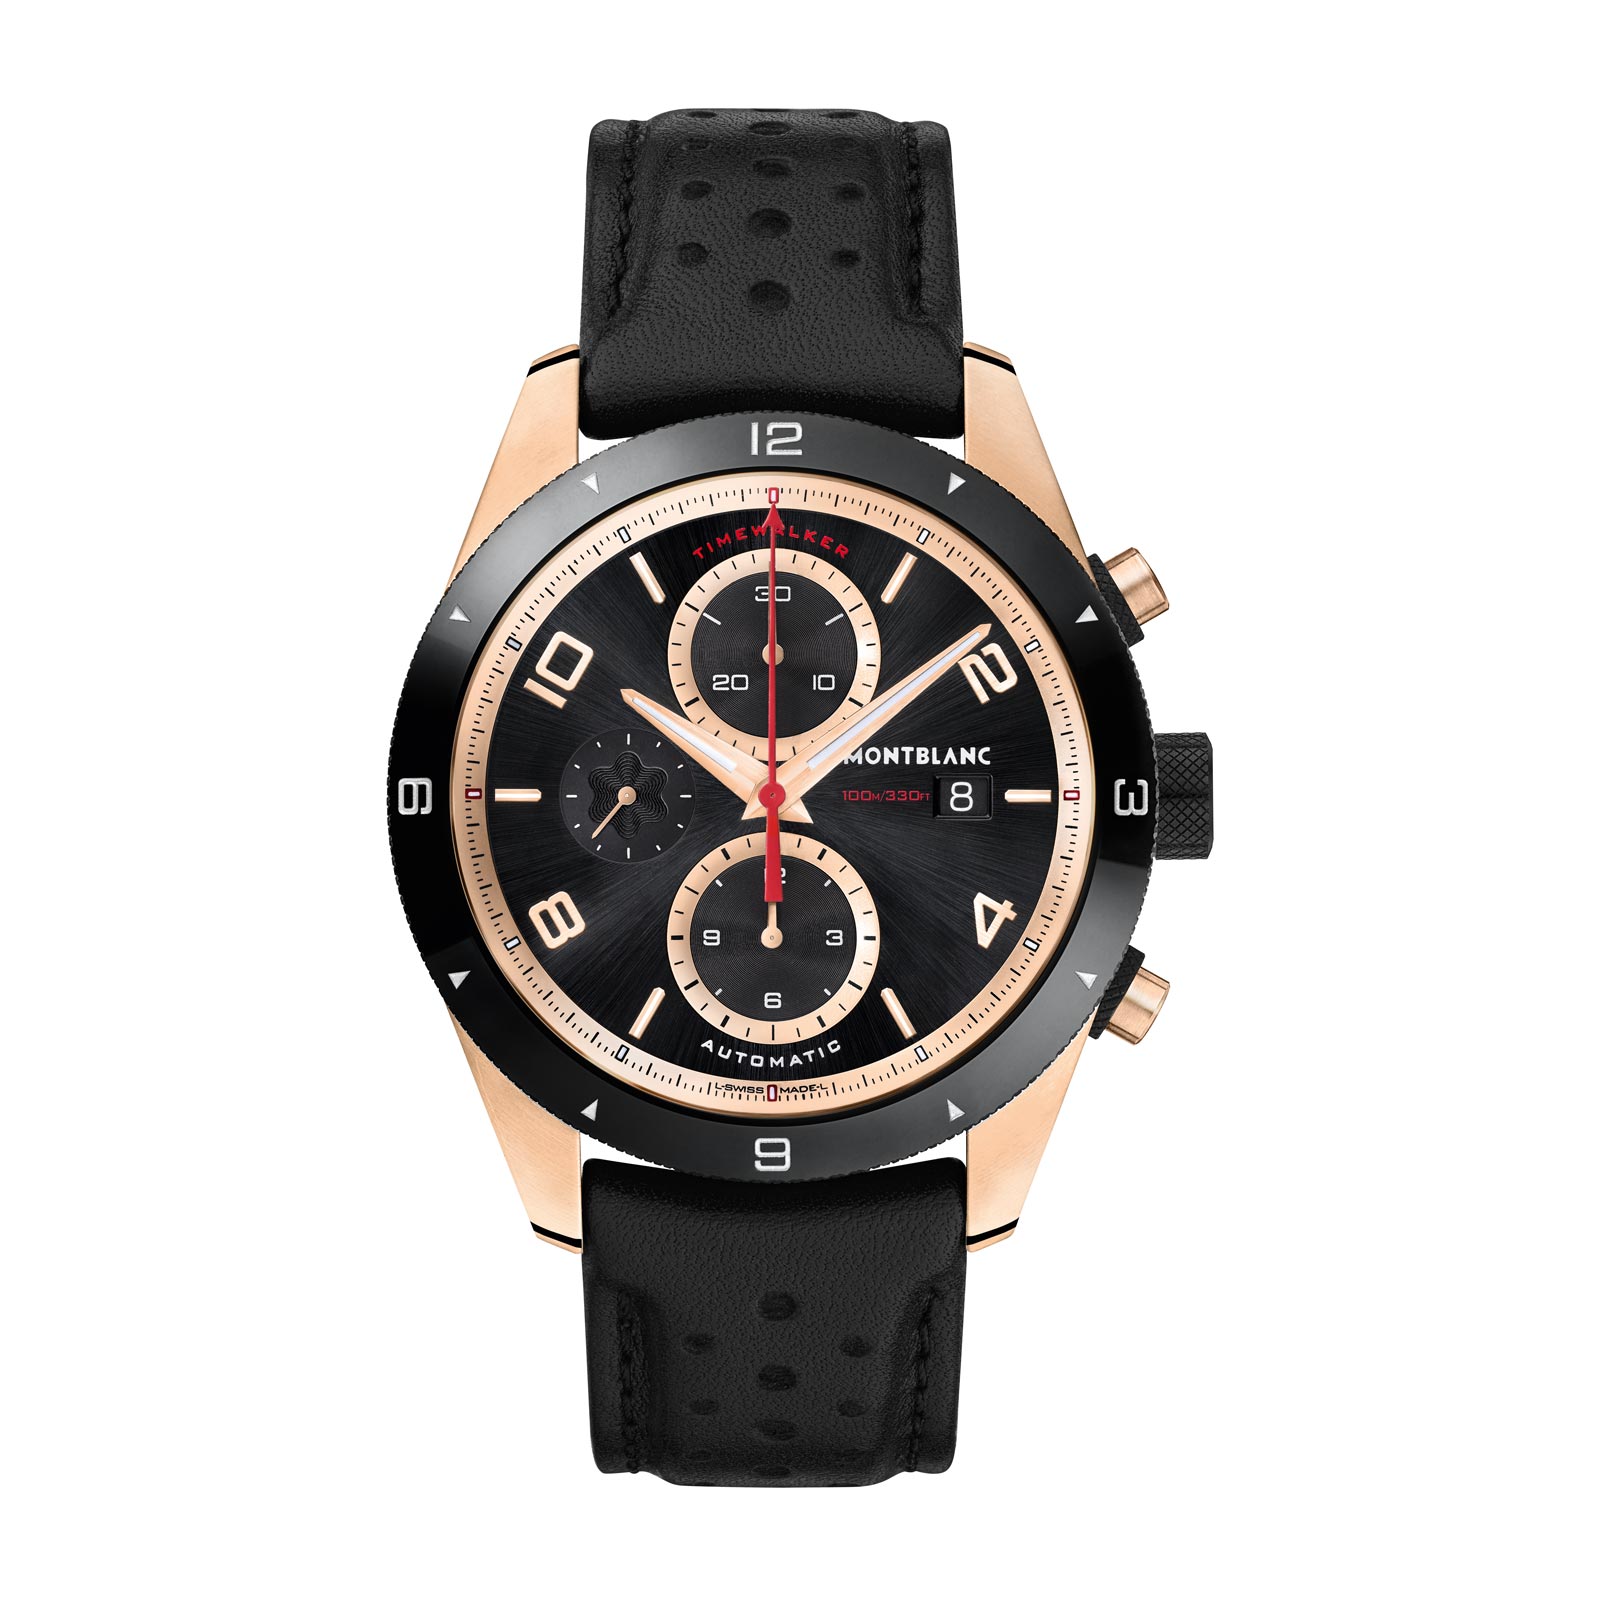 Montblanc TimeWalker Chronograph Automatic, red gold  and black ceramic